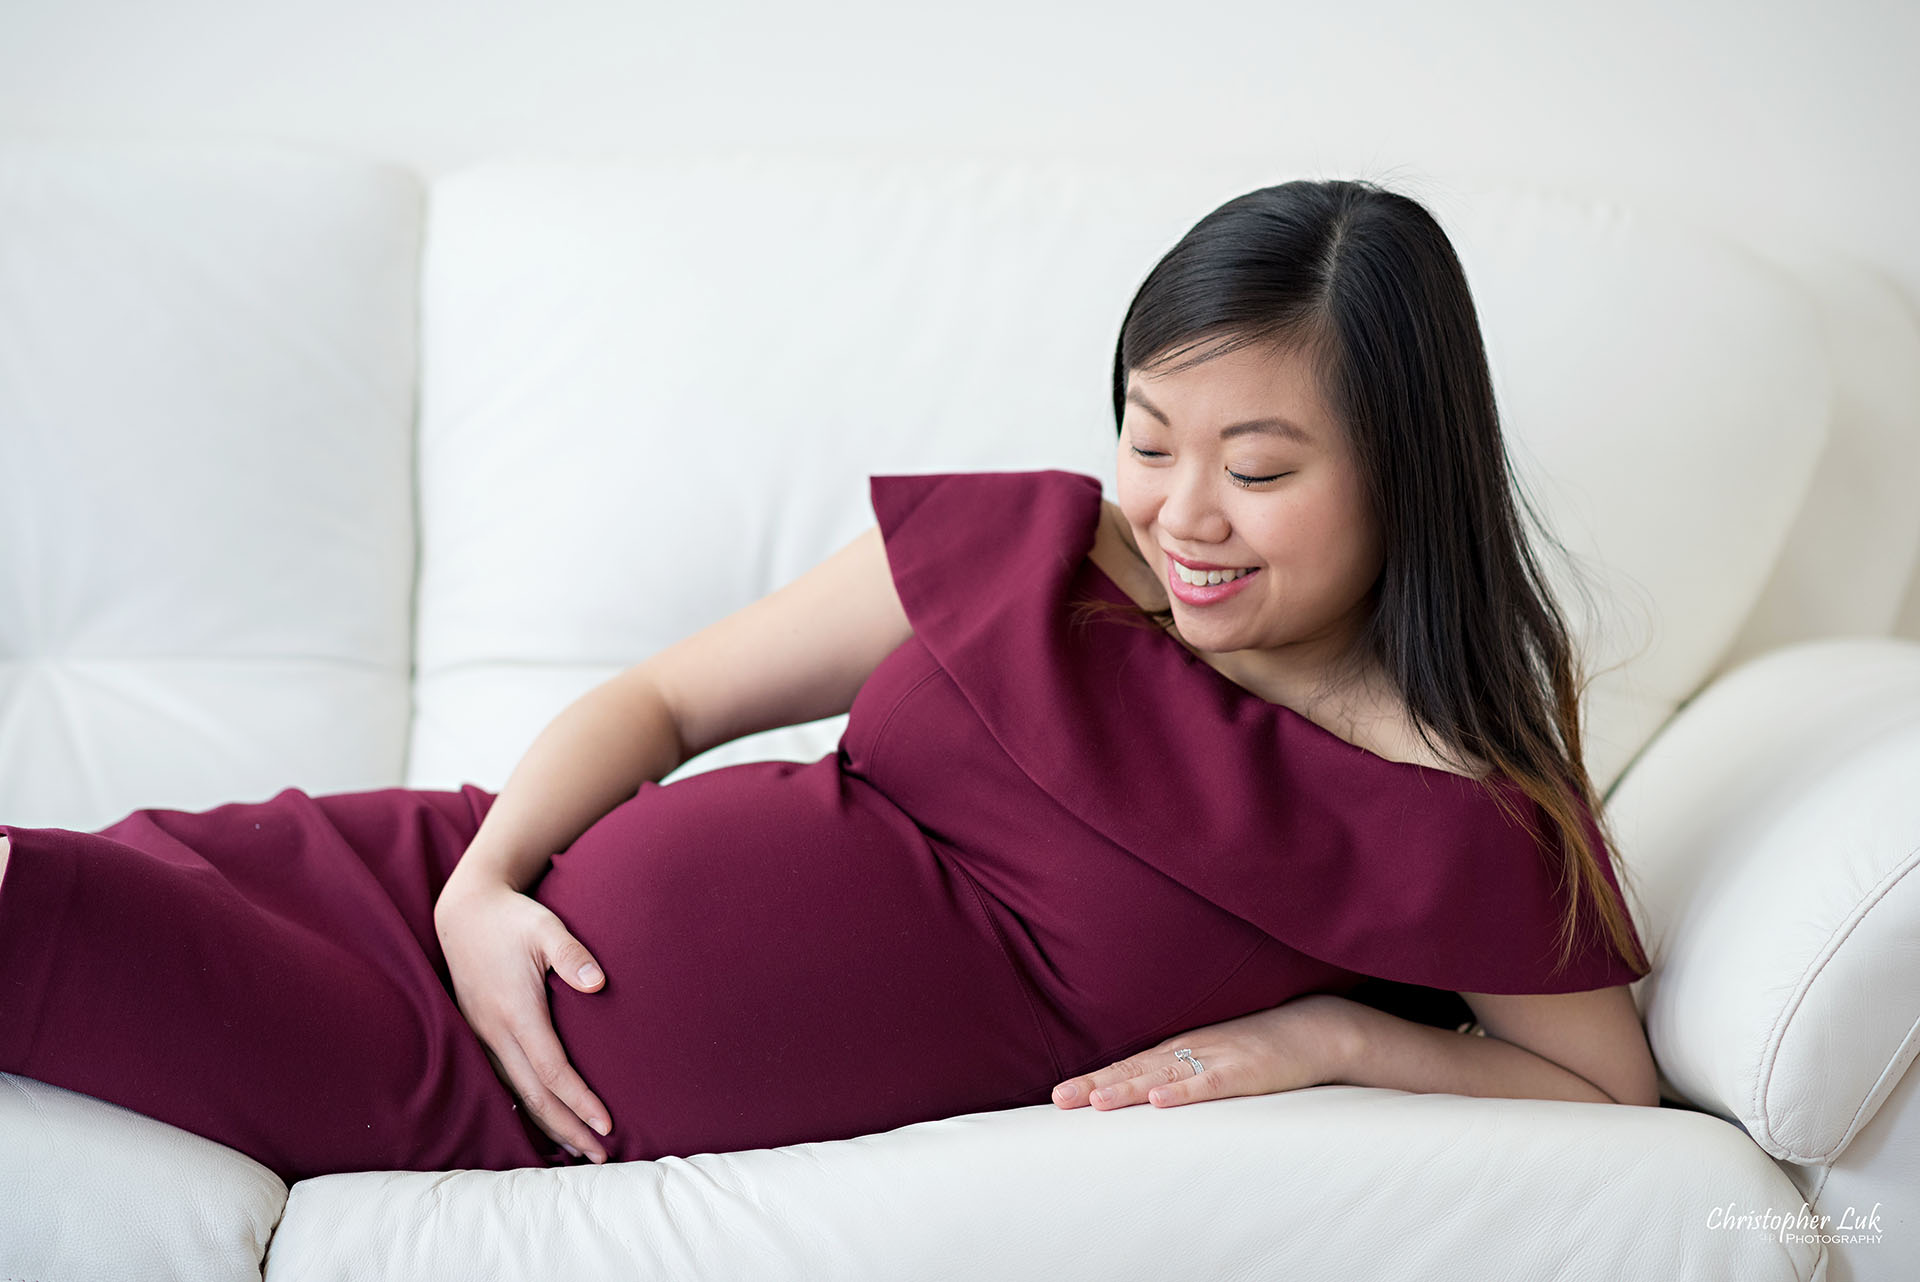 Christopher Luk Toronto Wedding Family Maternity Photographer - Markham Richmond Hill Toronto Natural Candid Photojournalistic Mom Baby Bump Baby Pregnant Pregnancy Mommy Sofa Looking Lying Down Belly Landscape